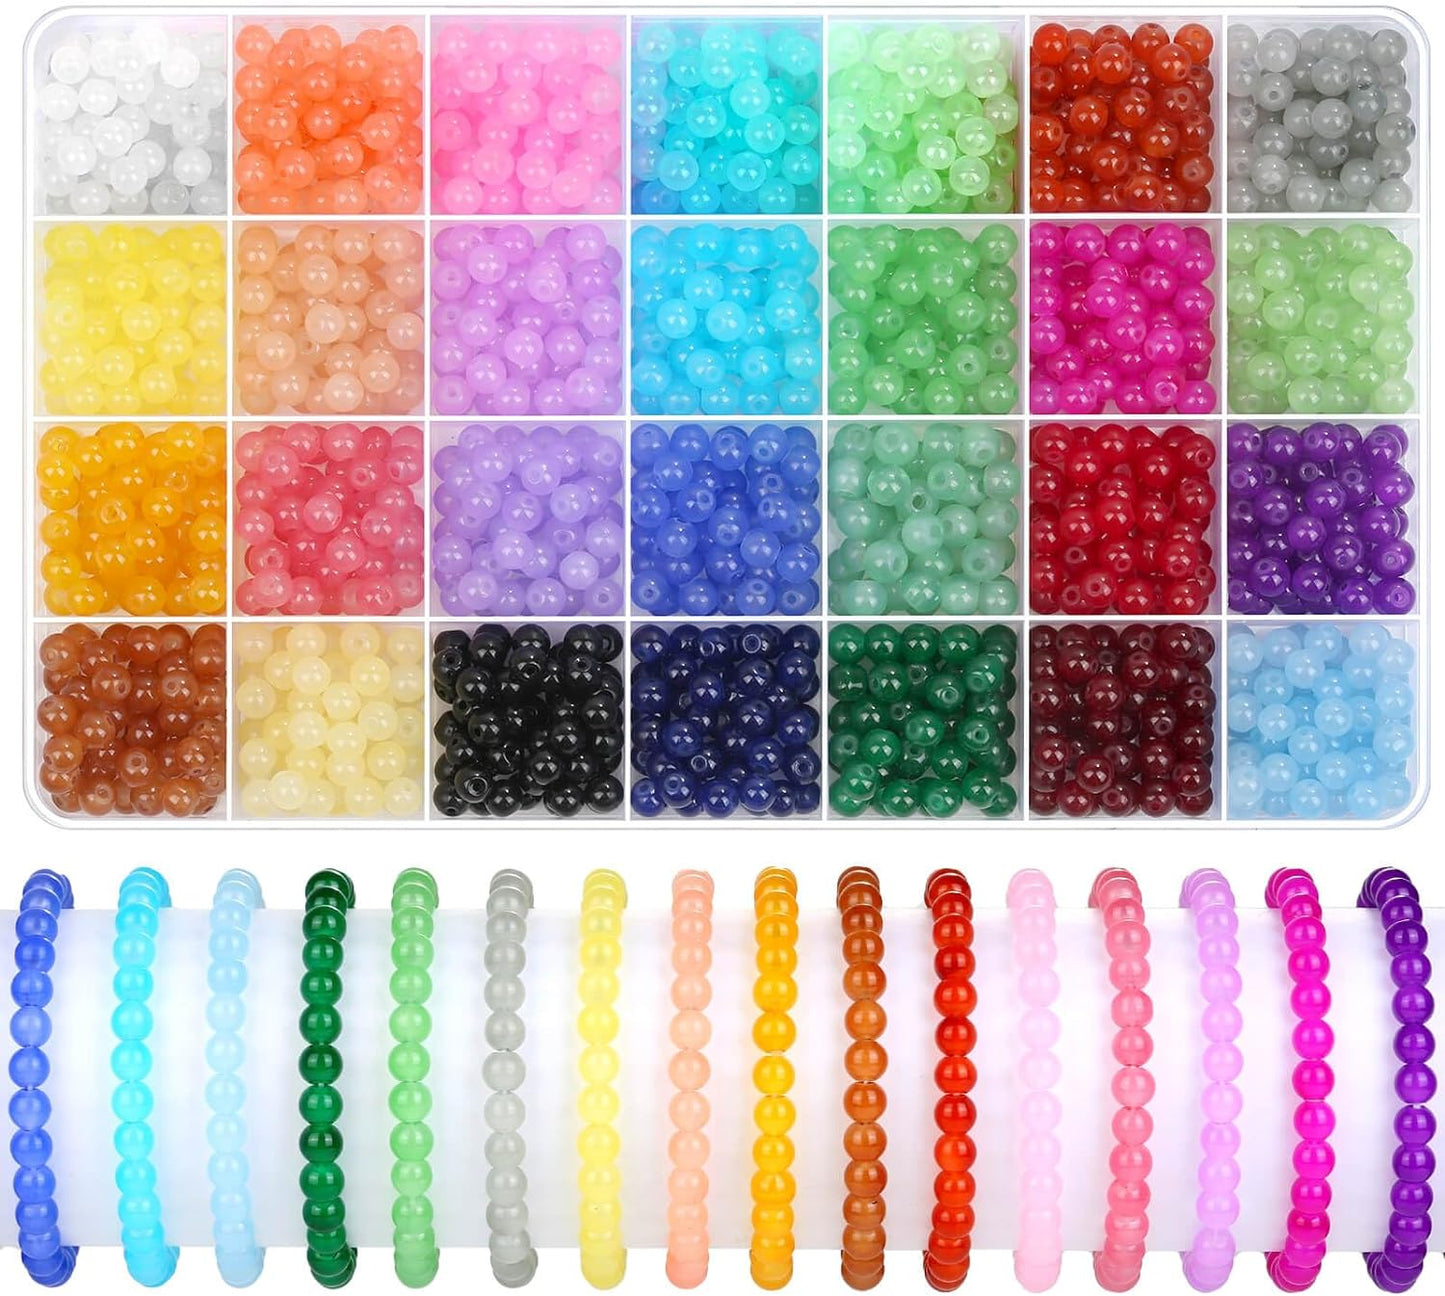 1400 Pieces 6mm Round Glass Beads for Jewelry Making, 28 Colors Crystal Beads for Bracelets Jewelry Making and DIY Crafts(Solid Color)